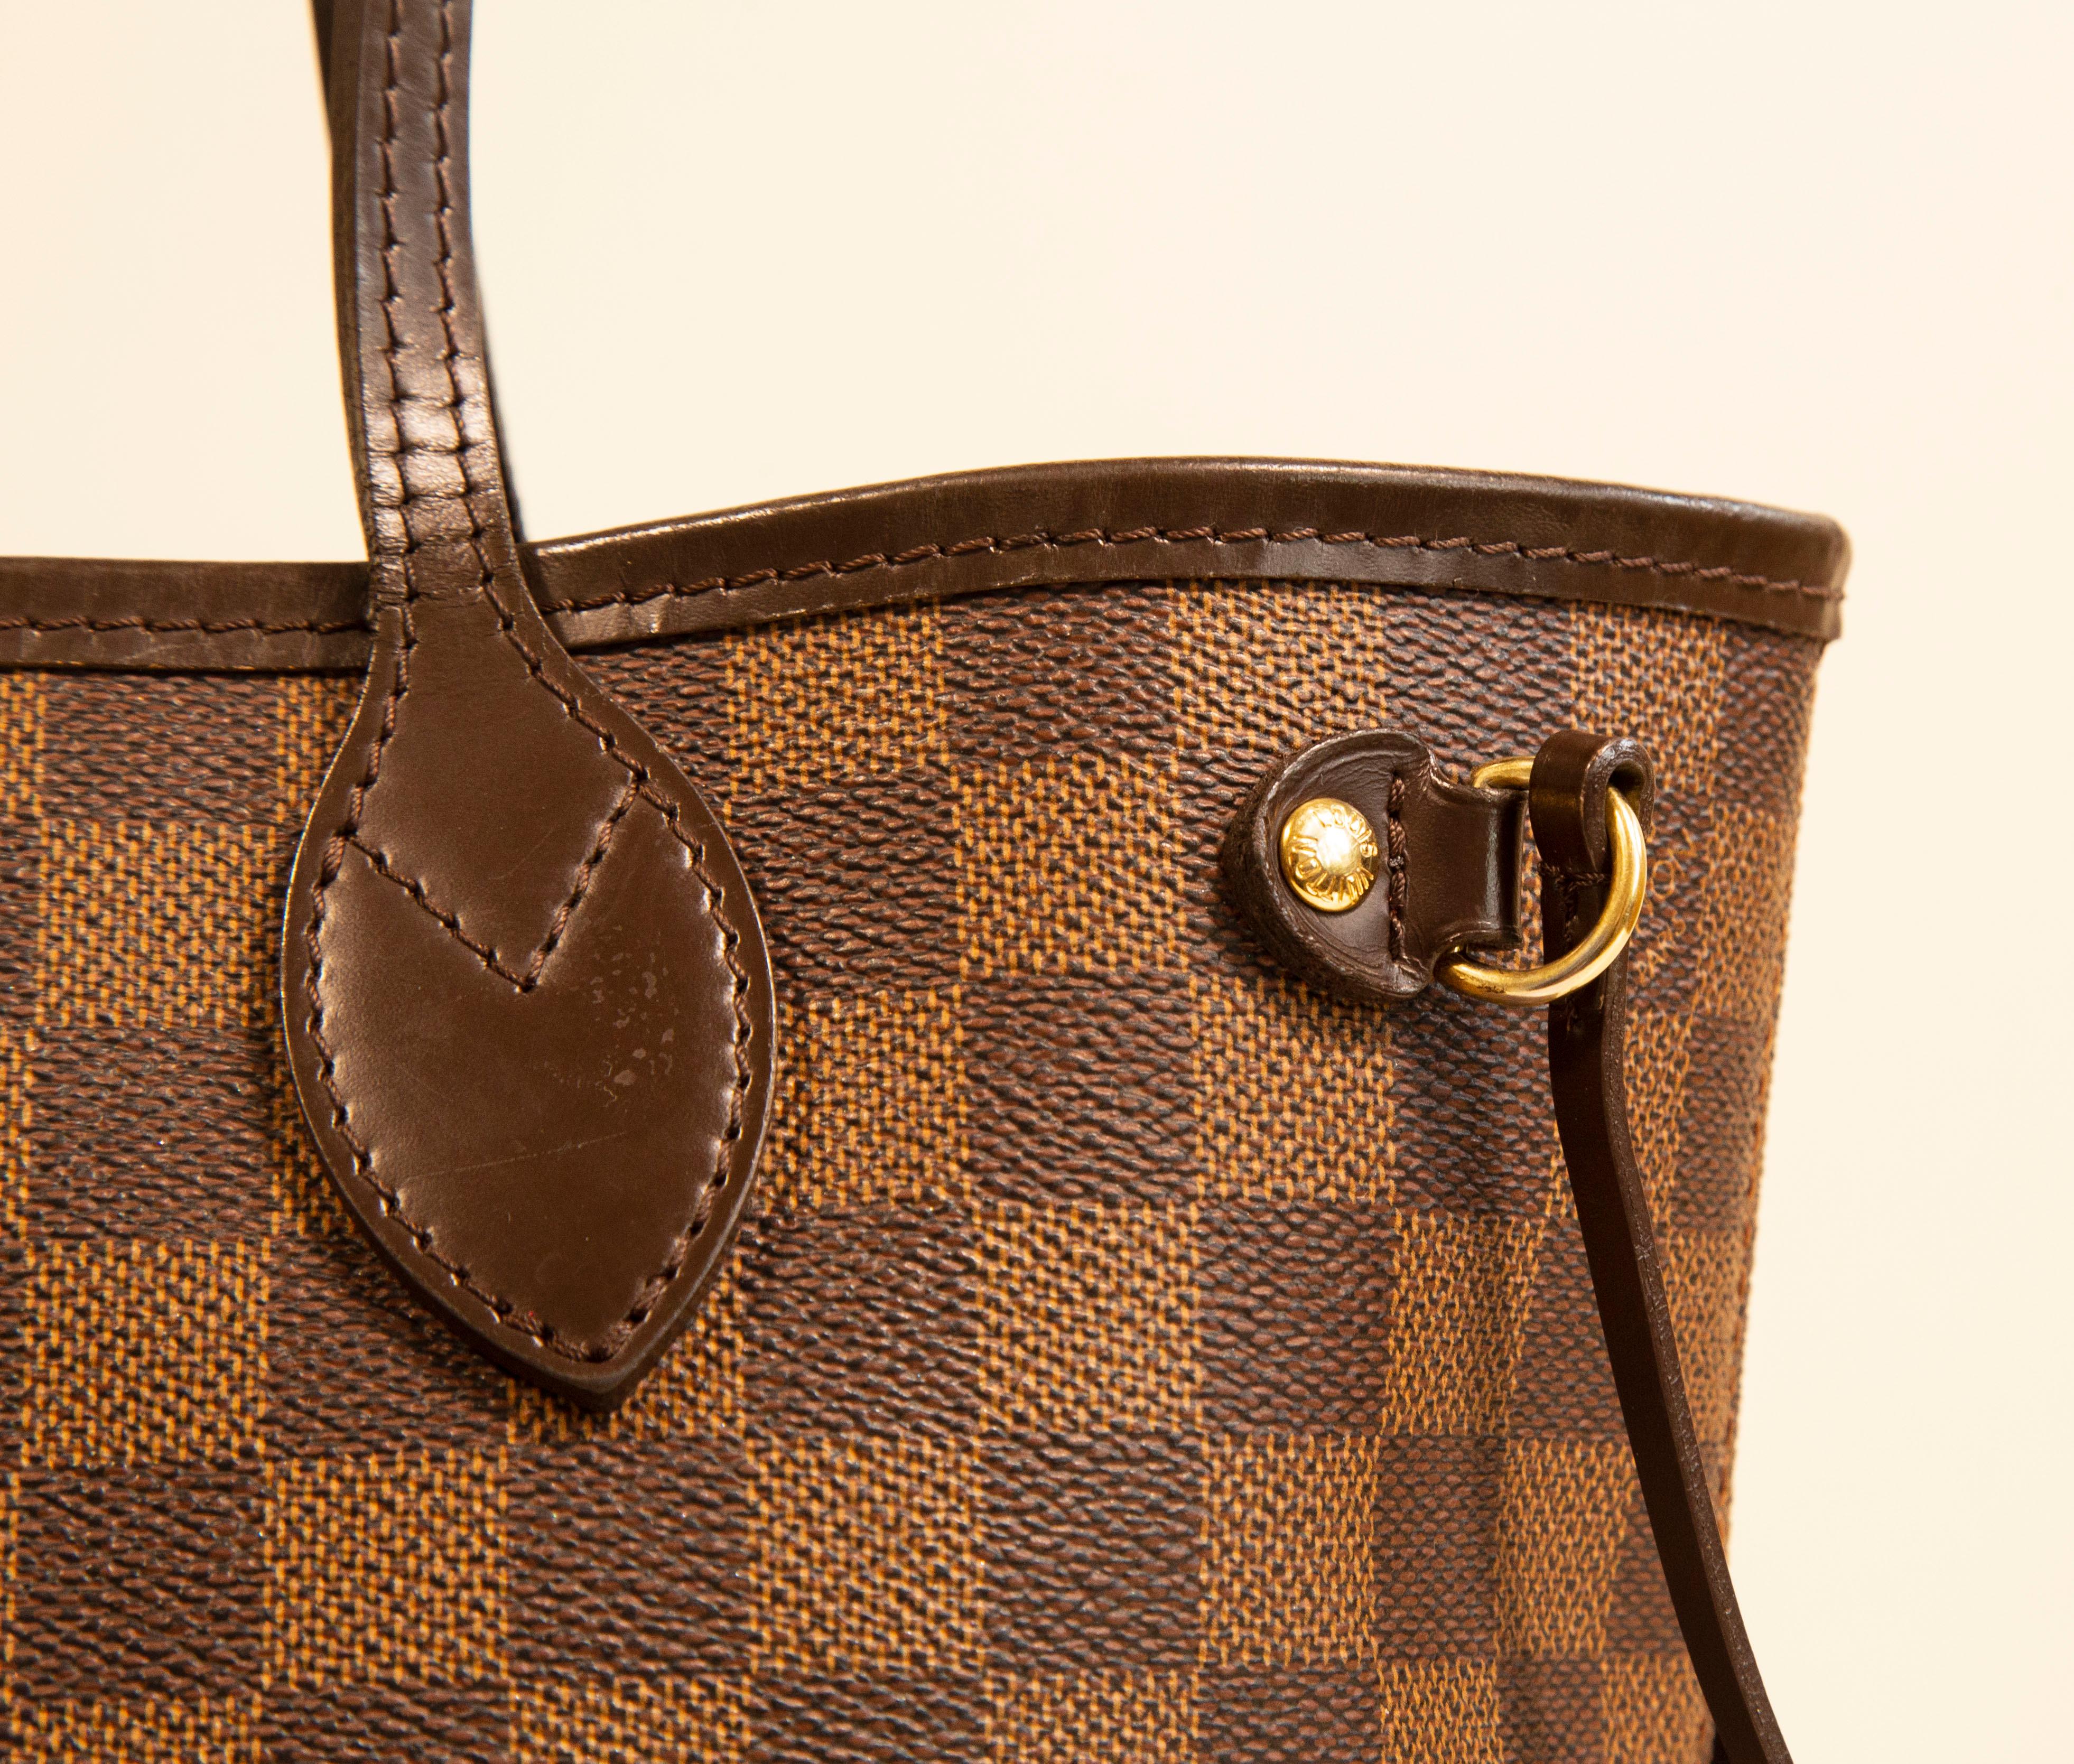 Louis Vuitton Neverfull PM Tote Shoulder Bag in Damier Ebene In Good Condition For Sale In Arnhem, NL